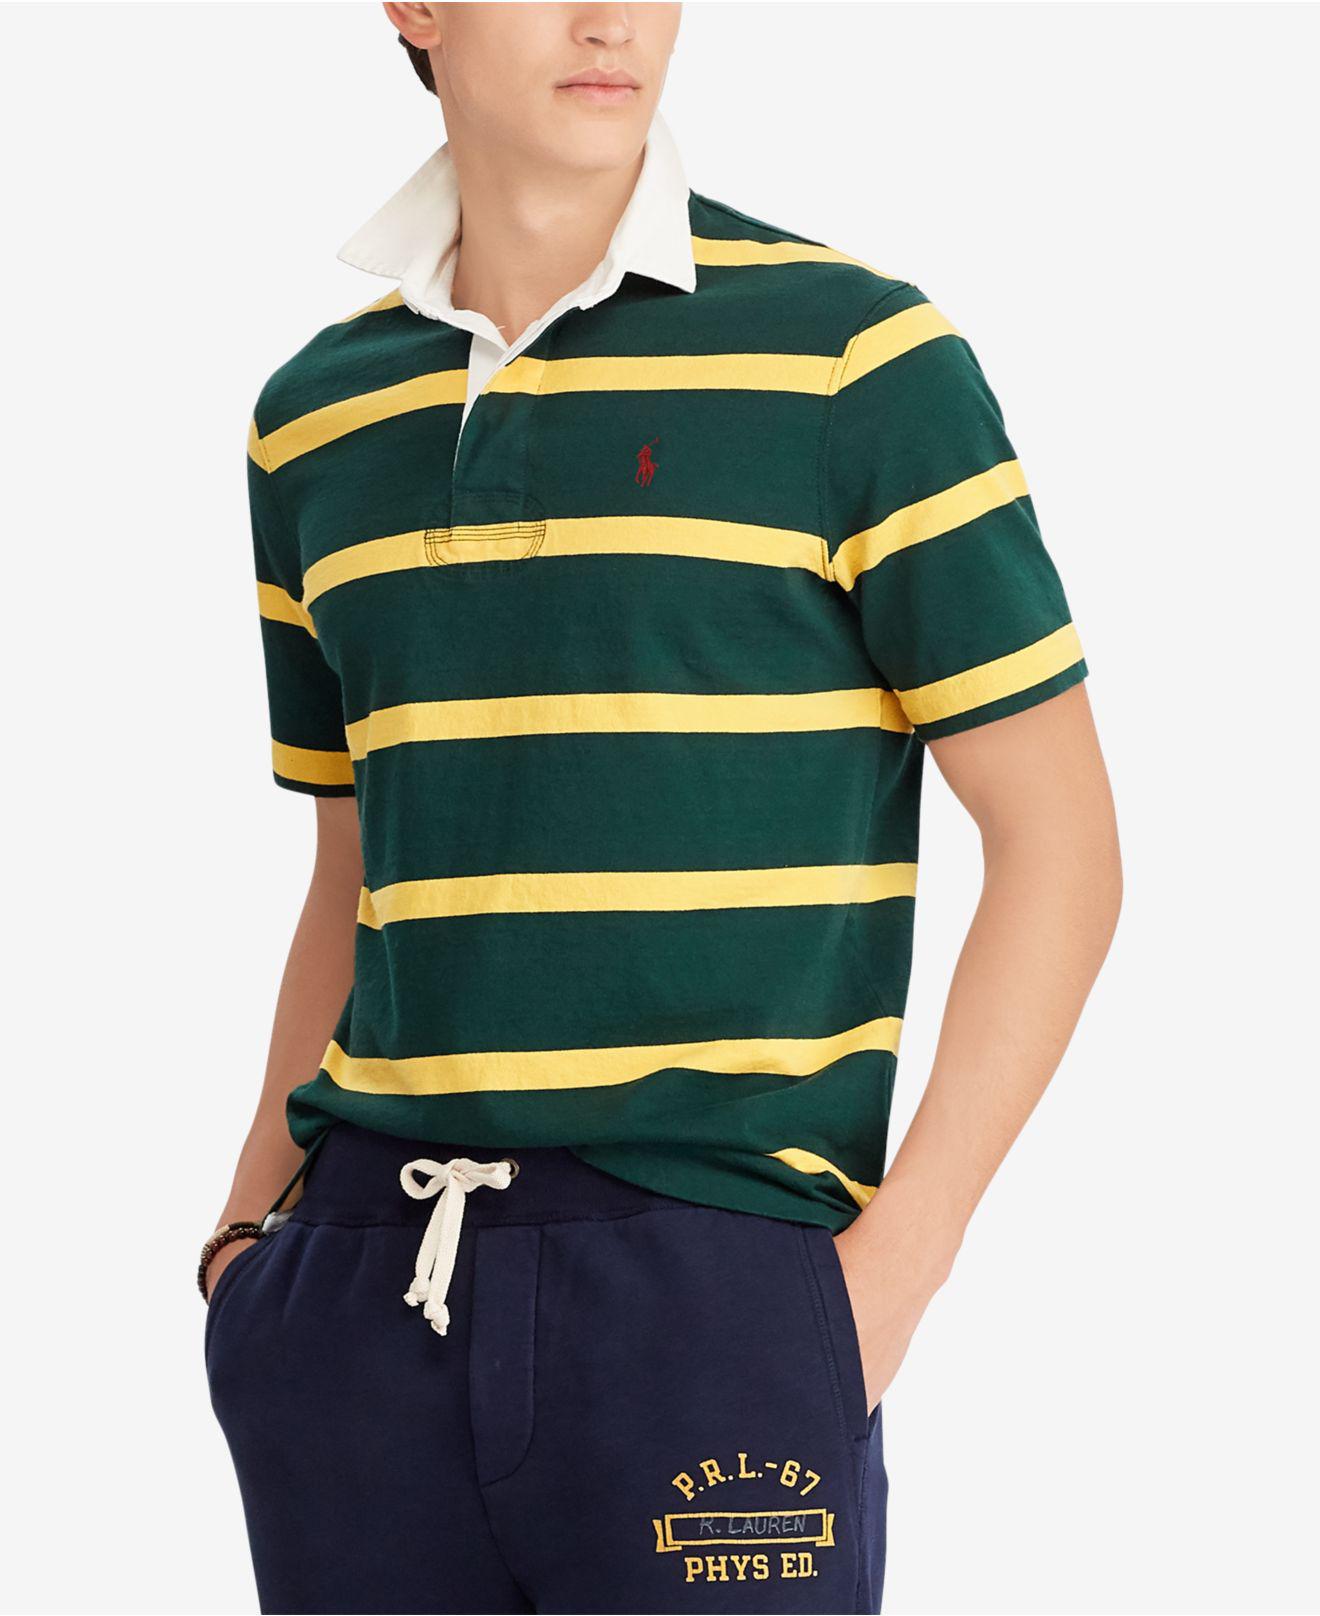 Polo Ralph Lauren Cotton Short Sleeve Rugby in Green for Men - Lyst